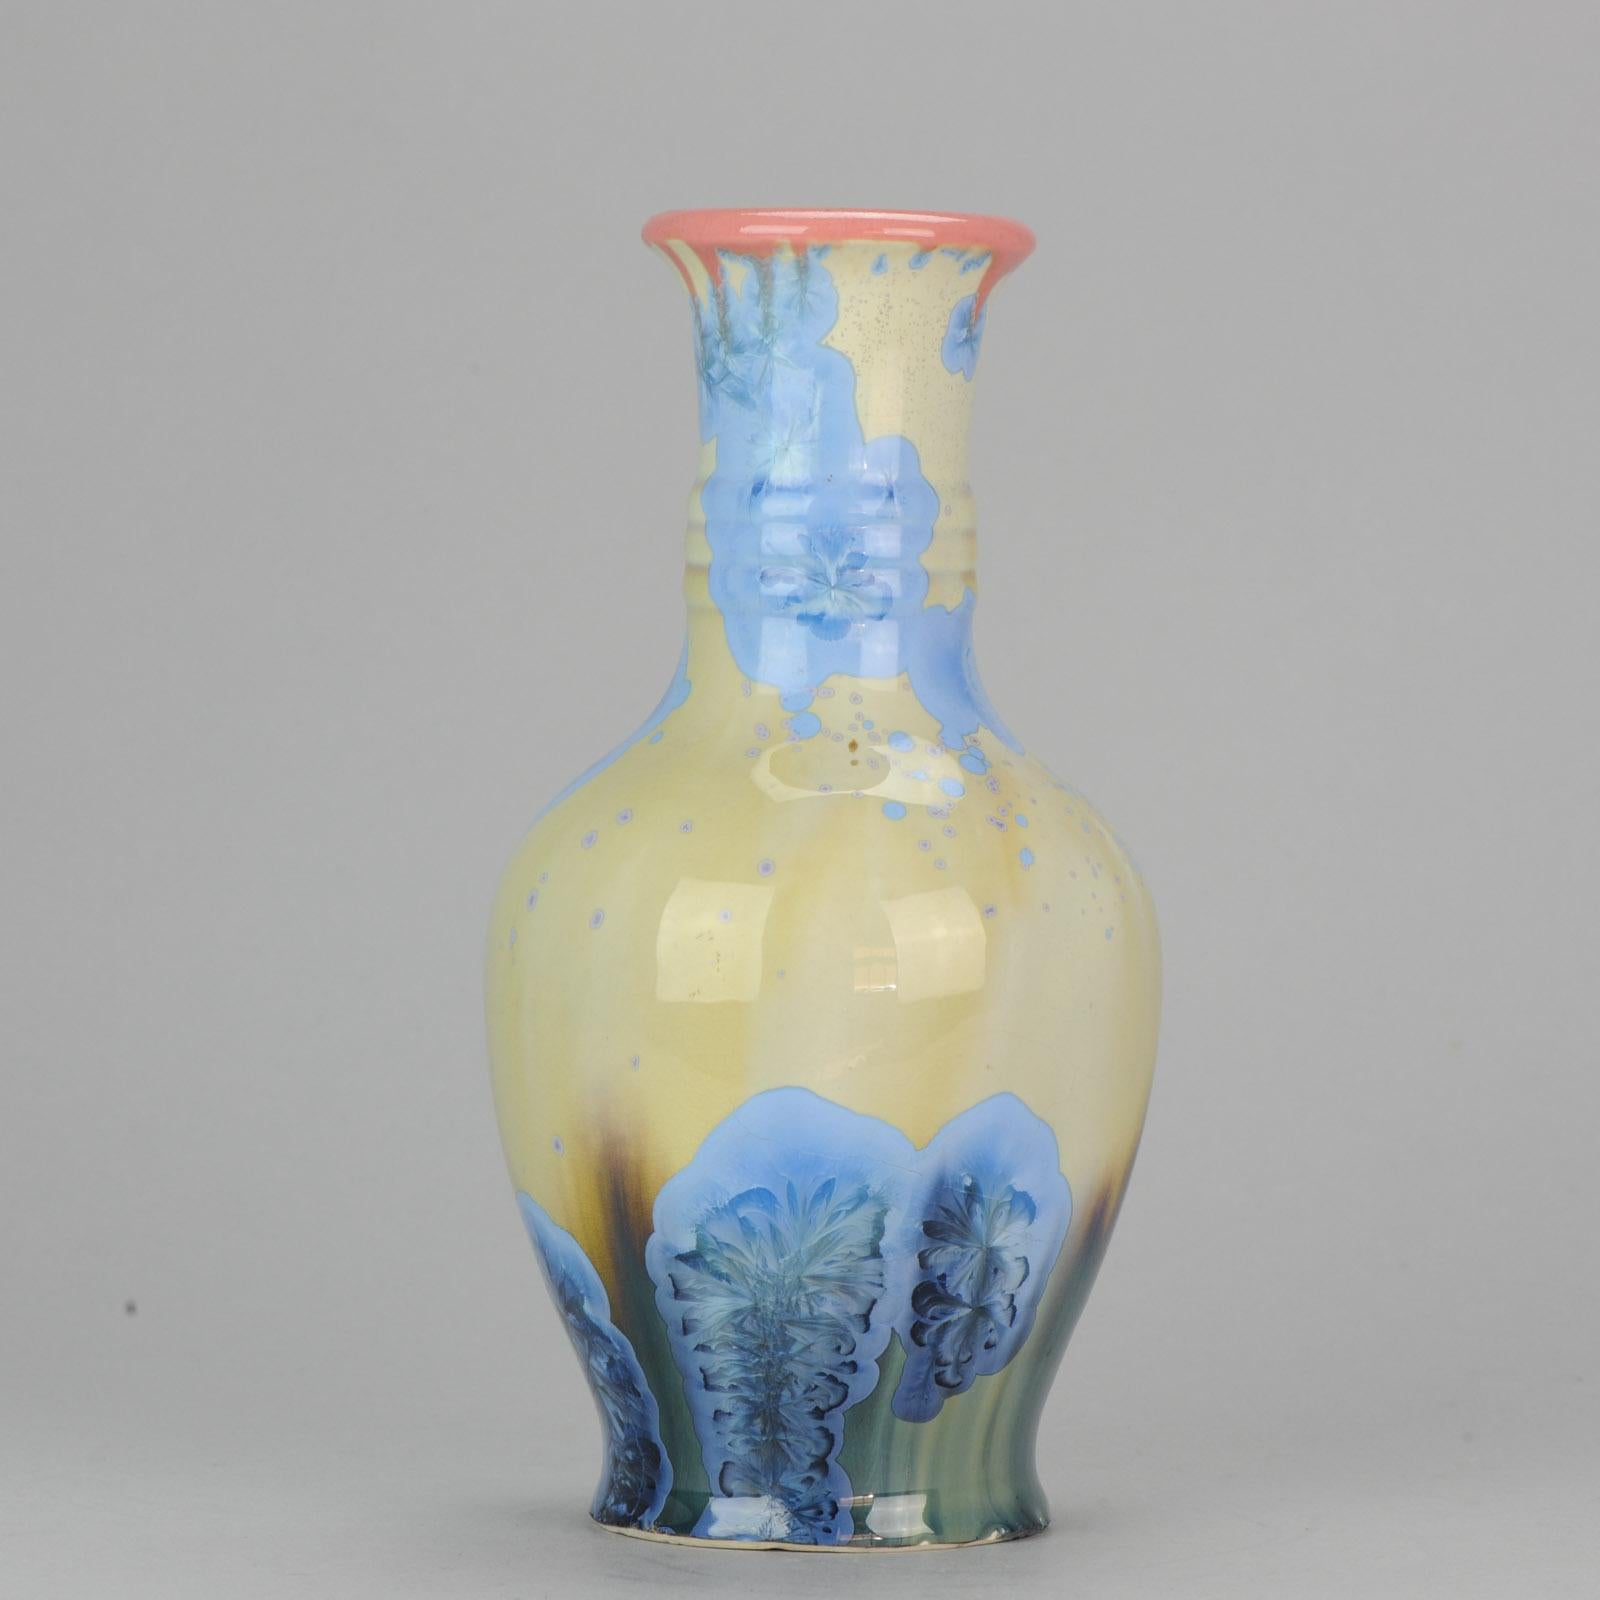 Very nice vase, high quality. Innovative Crystalline glaze used in Shiwan in the 1970s-1980s. A true masterpiece. This is teh antique of the future.

Provenance: Bought in the 1980s in China. Afterwards exhibited and on loan to the Leiden Museum